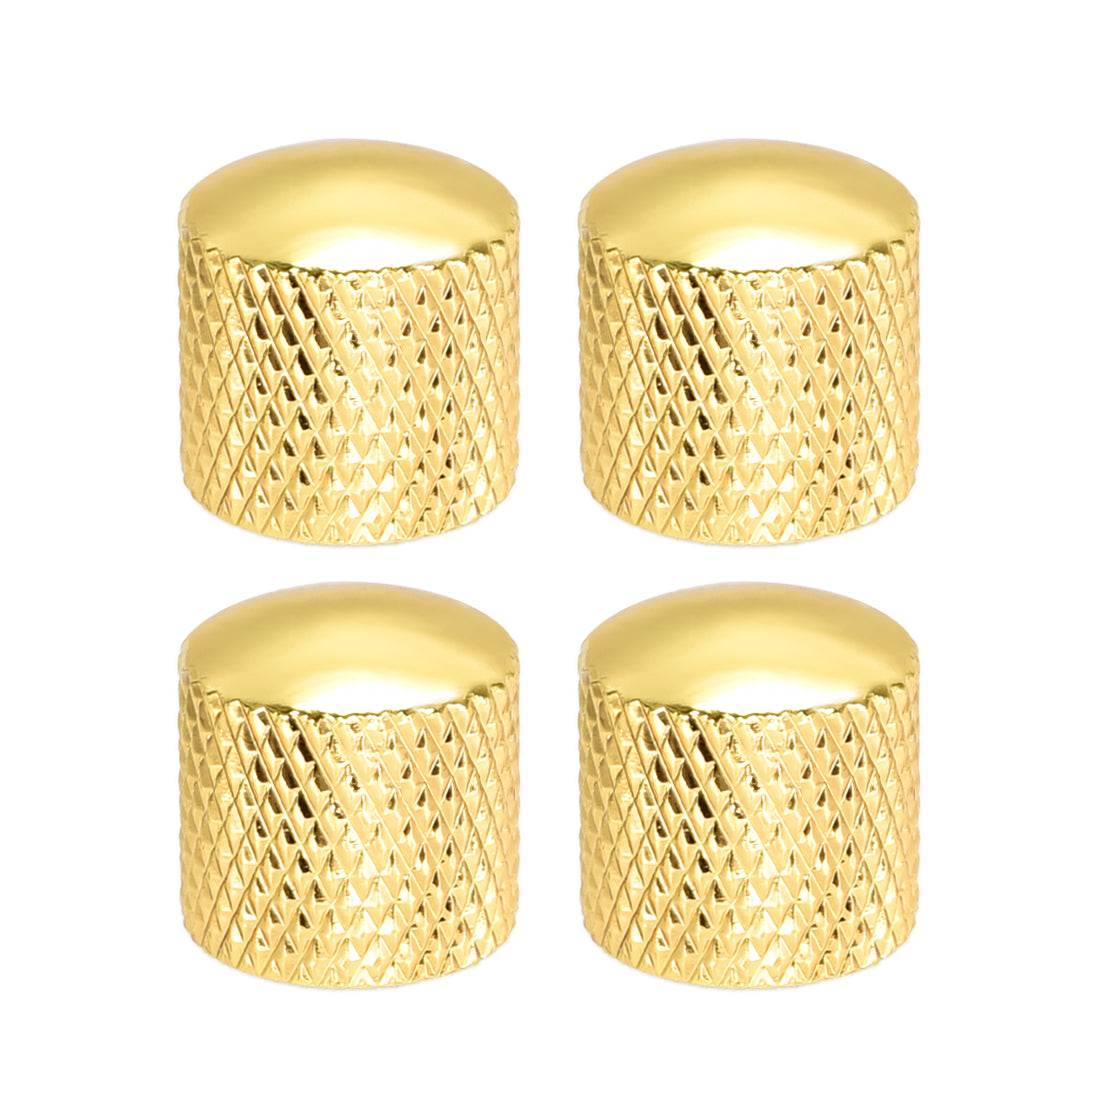 uxcell Uxcell 6mm Metal Potentiometer Control Knobs for Electric Guitar Bass Volume Tone Knobs Gold Tone 4pcs